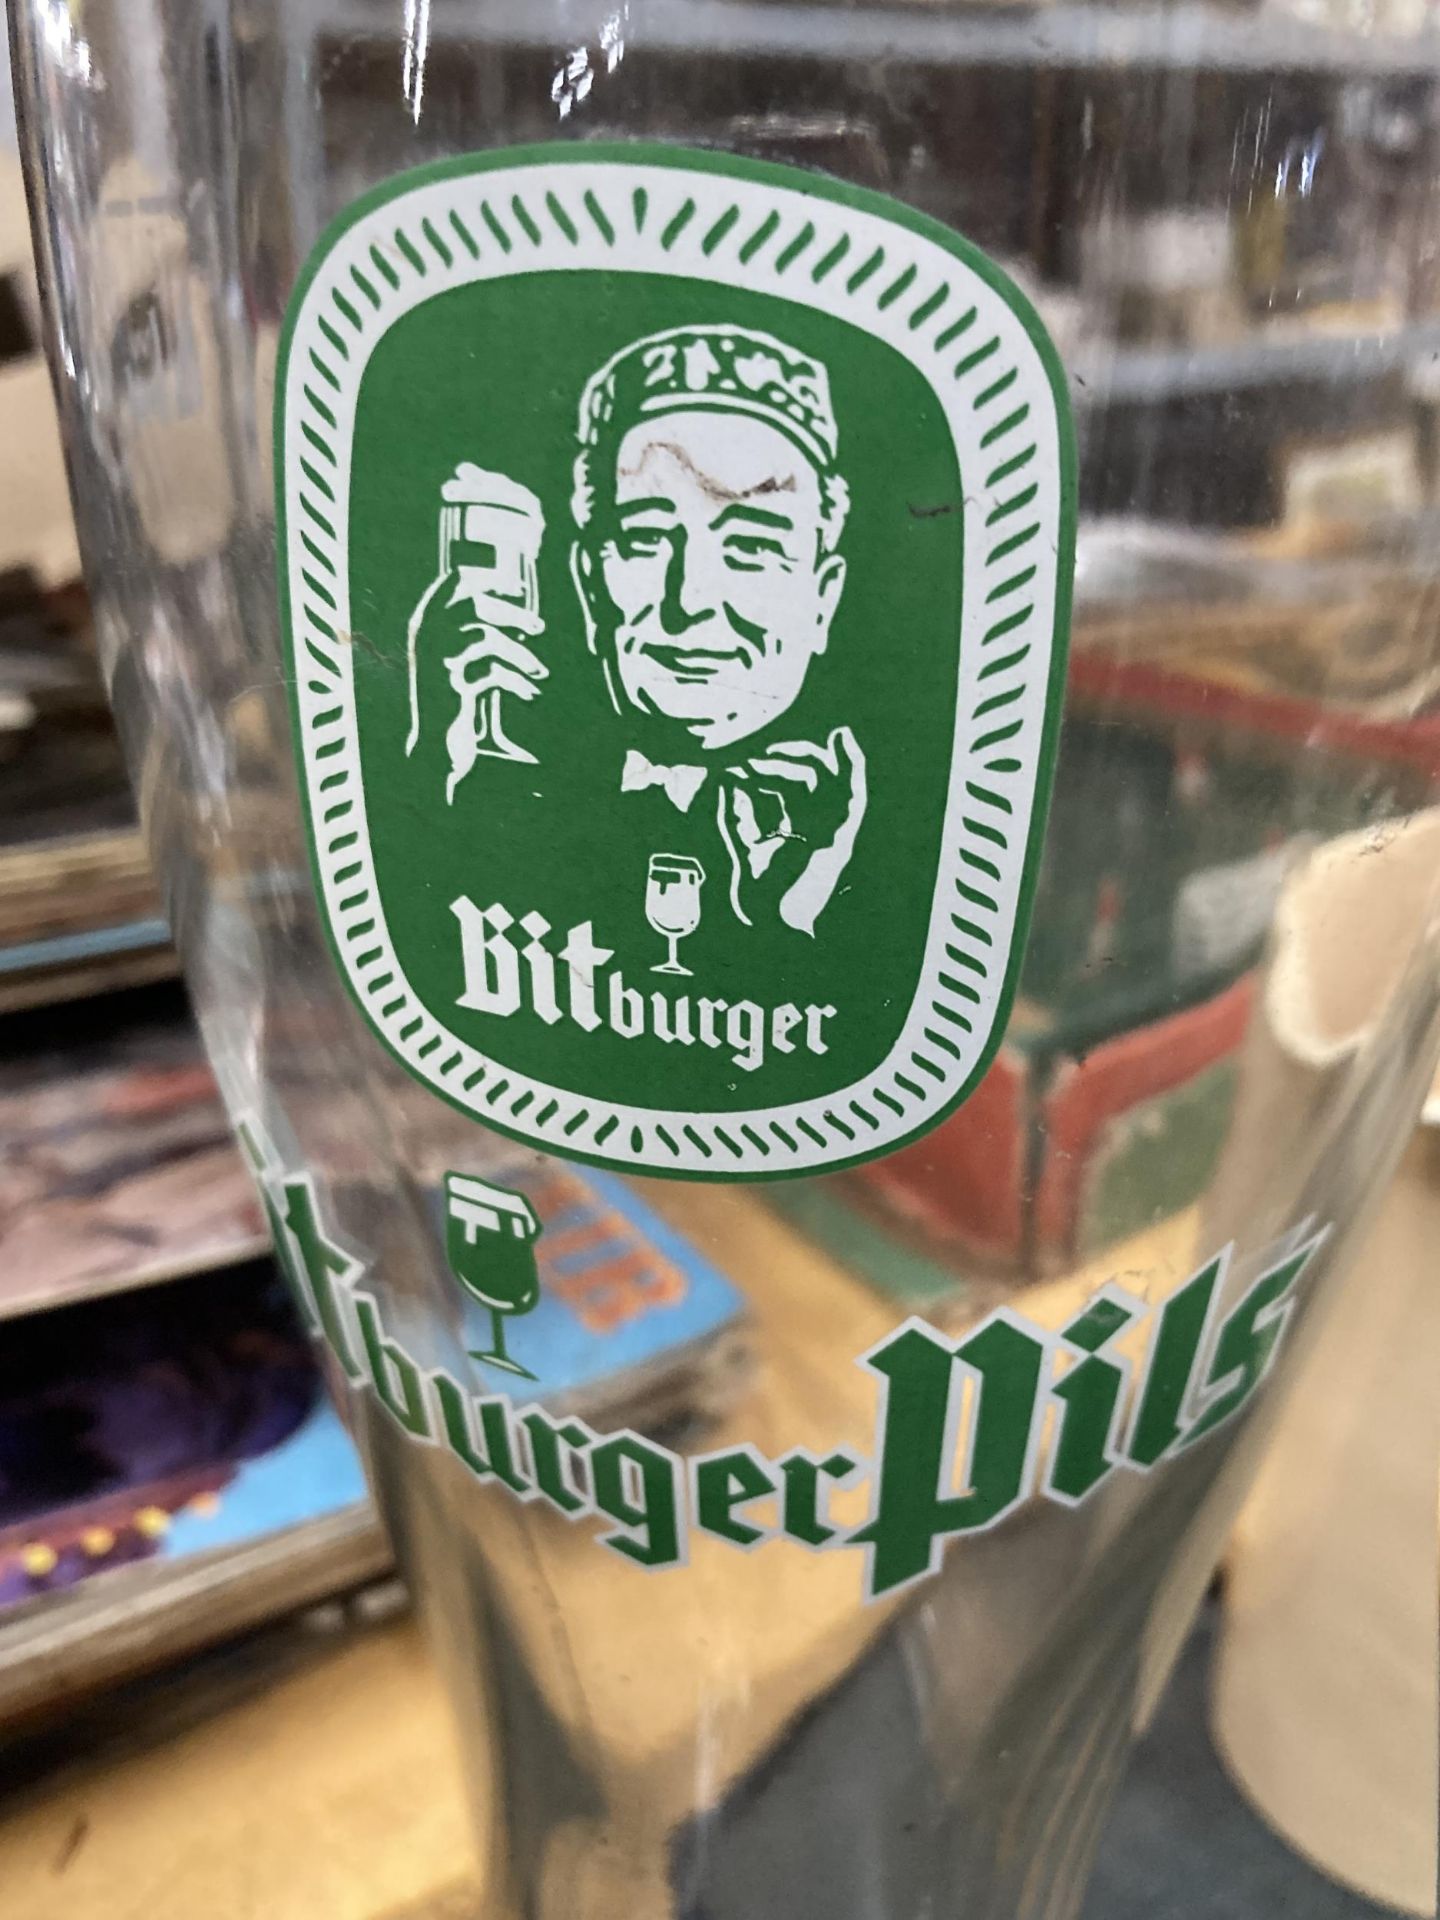 THREE LARGE GLASS BITBURGER PILS AND KROMBACHER GLASS 'ALE' BOOTS, TALLEST 34CM - Image 2 of 4